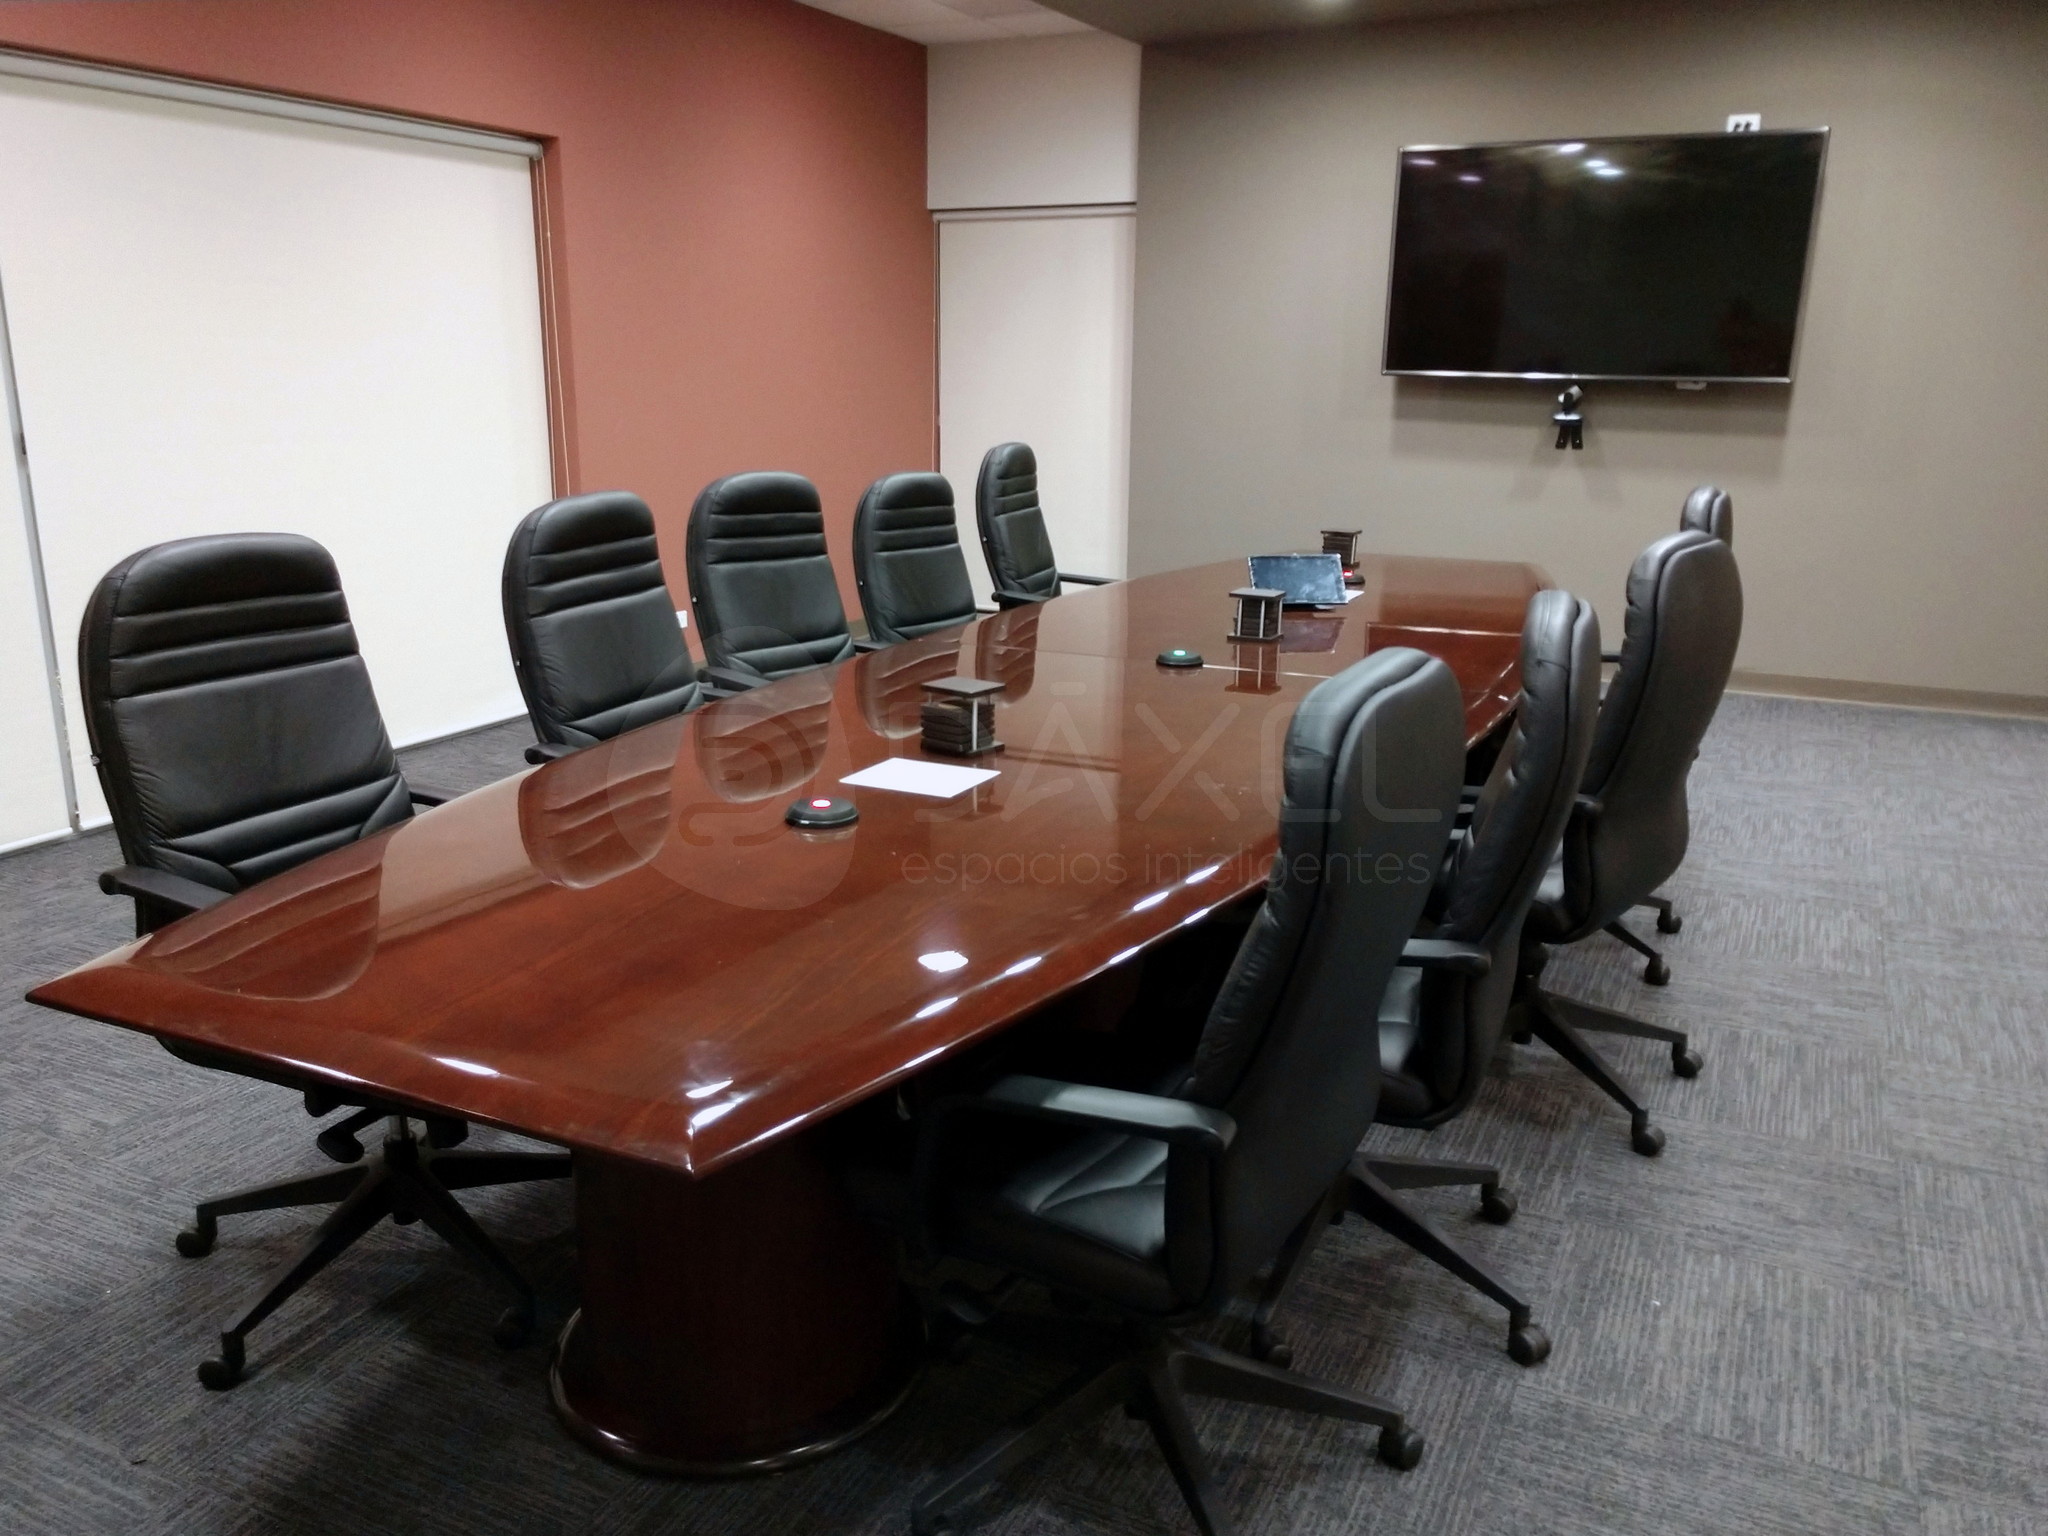 UGN Conference Room